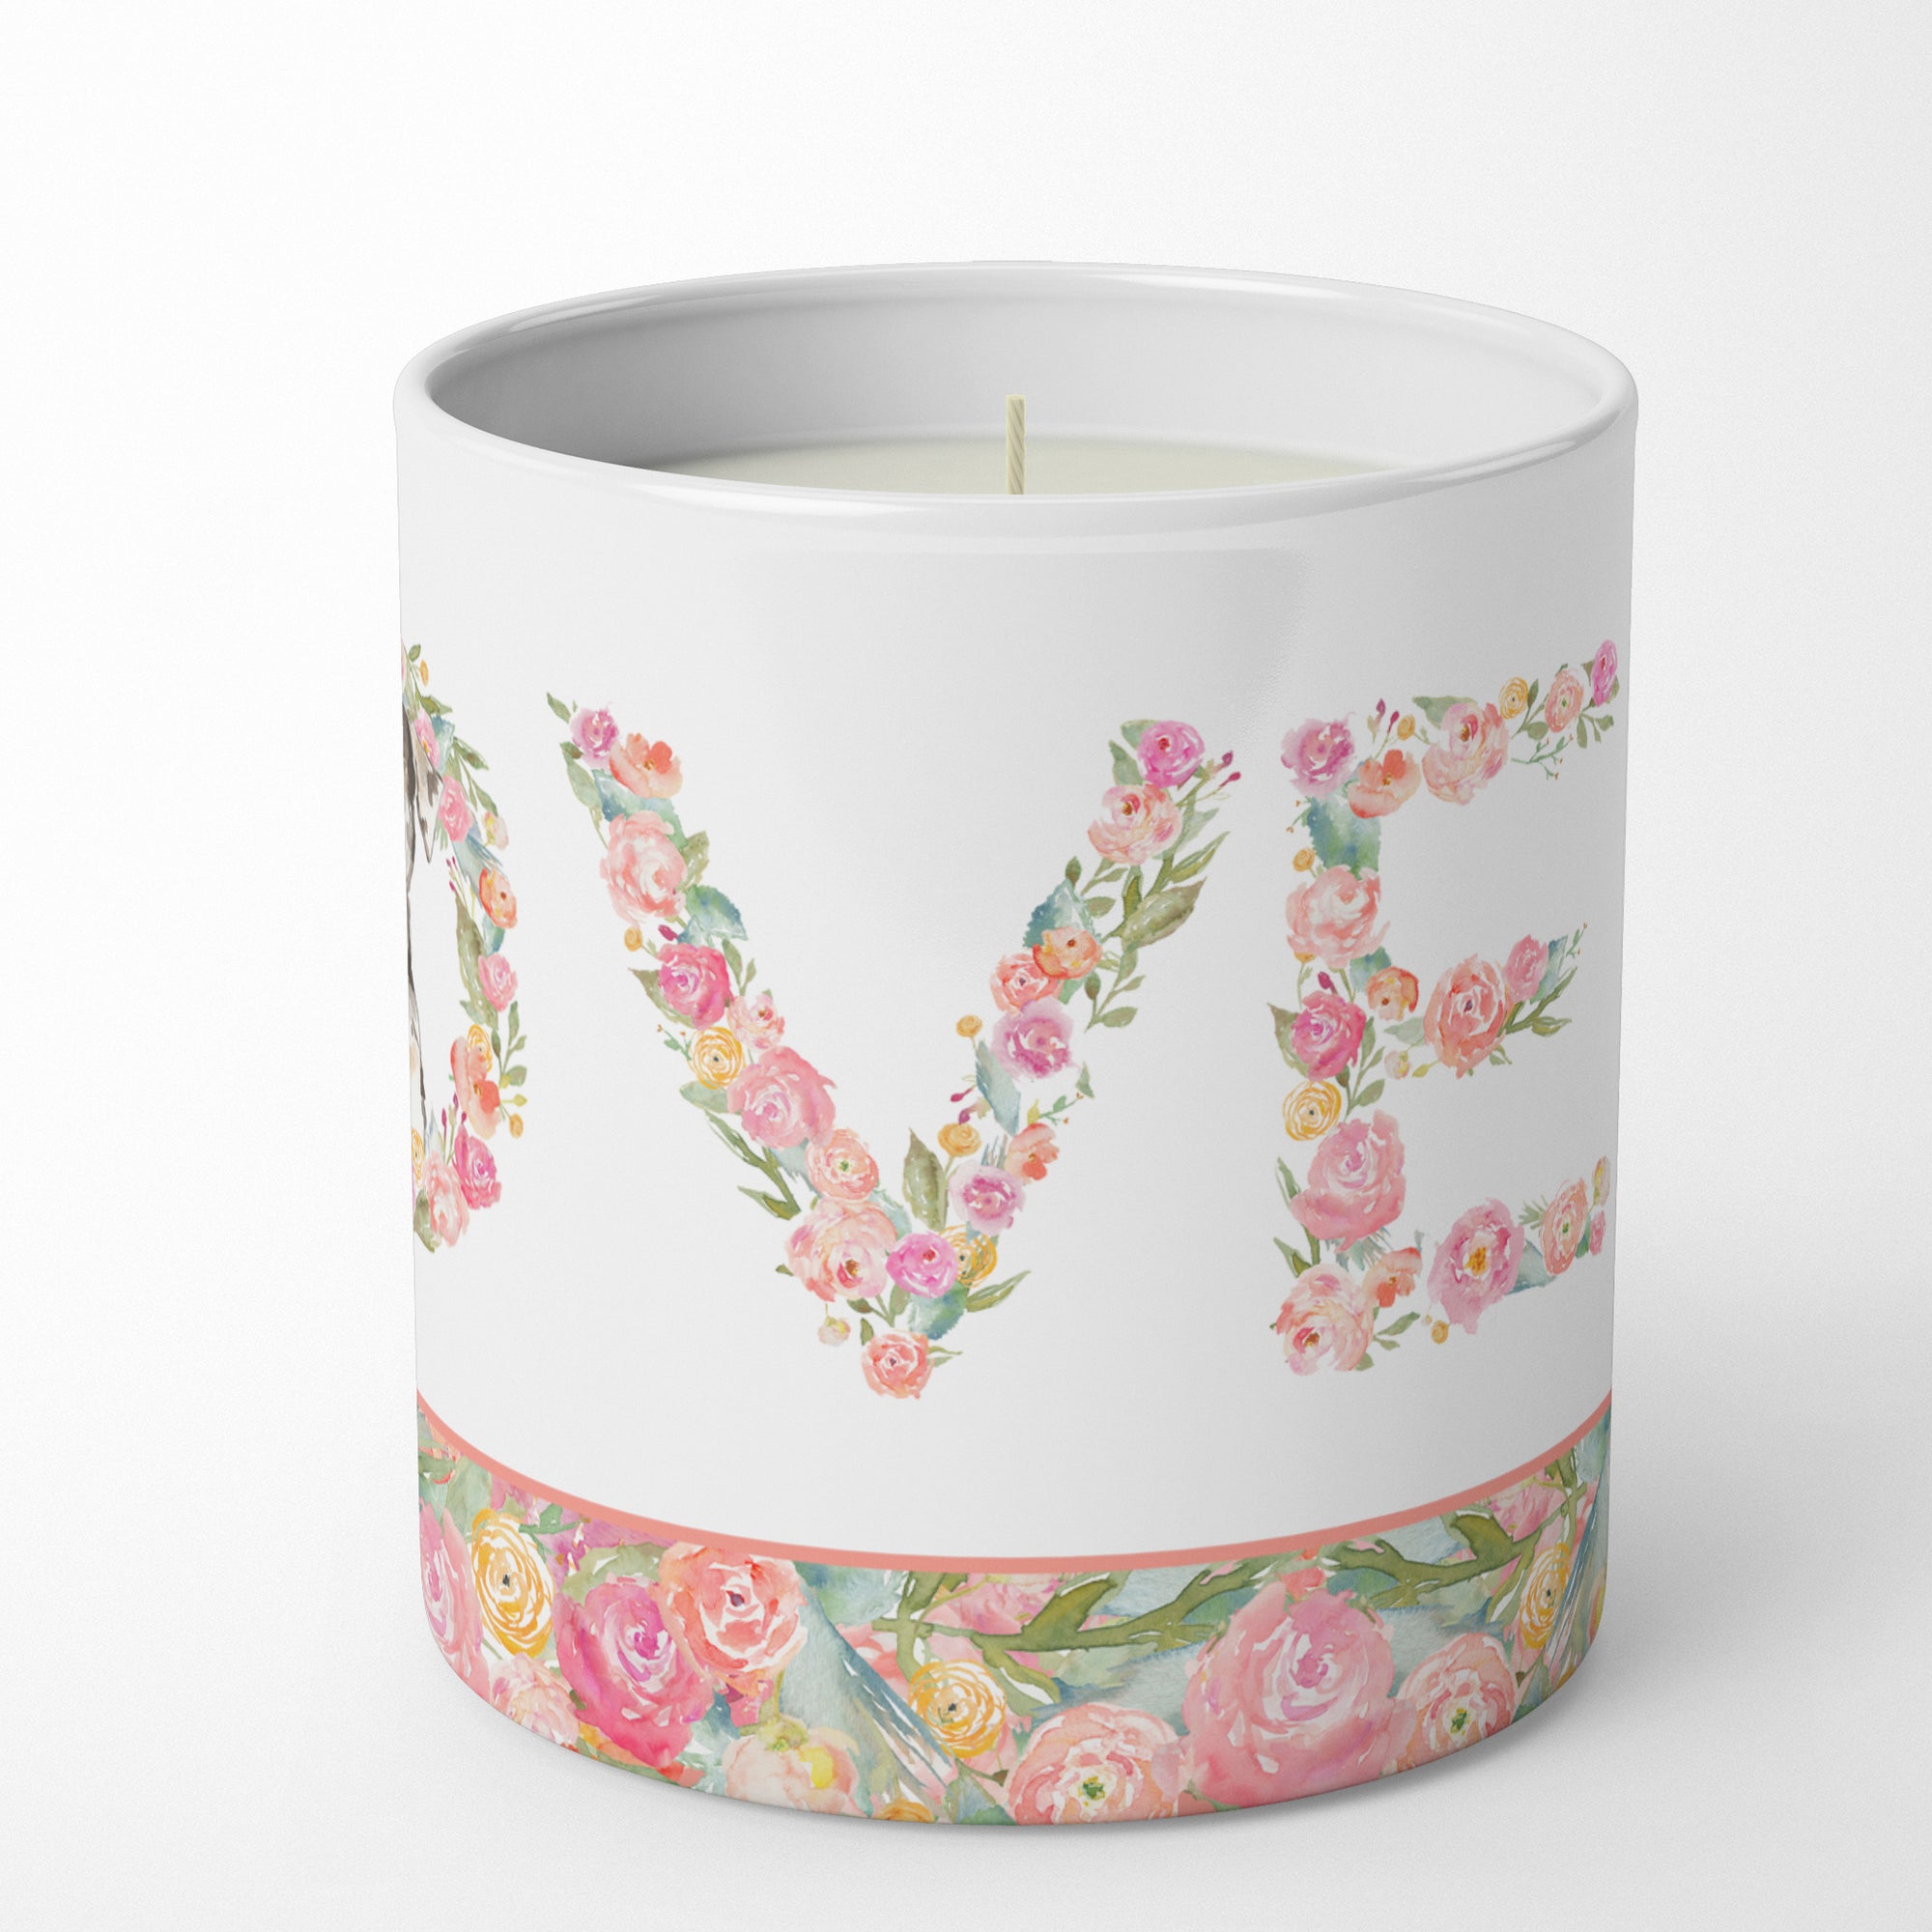 Catahoula Love 10 oz Decorative Soy Candle - the-store.com